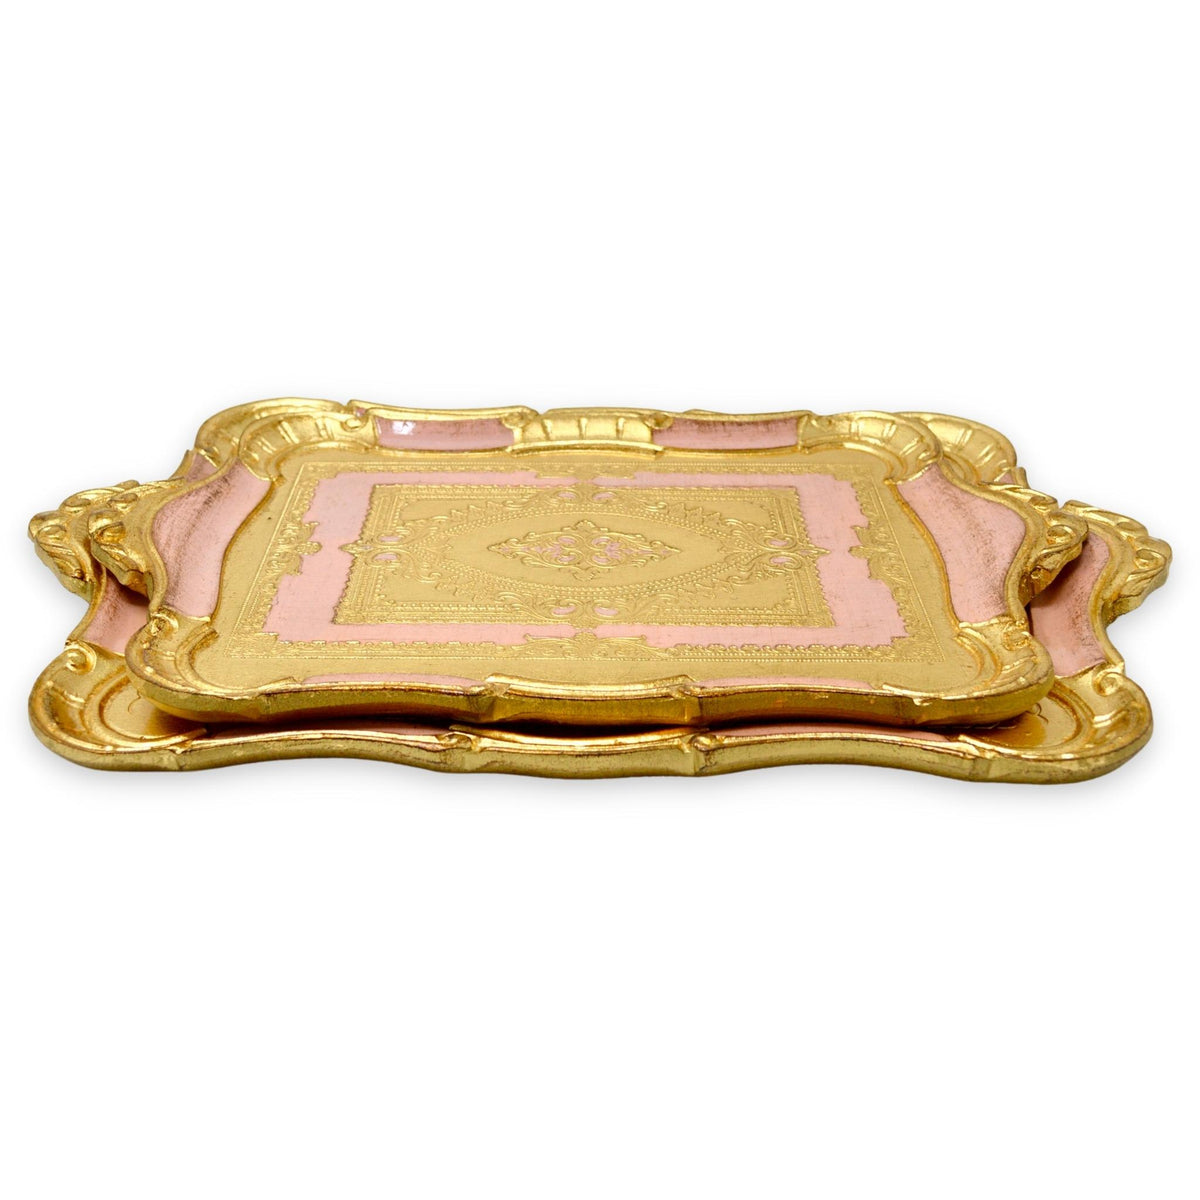 Florentine Carved Gilded Wood Tray, Scalloped With Handles, Pink, Choice of size - My Italian Decor